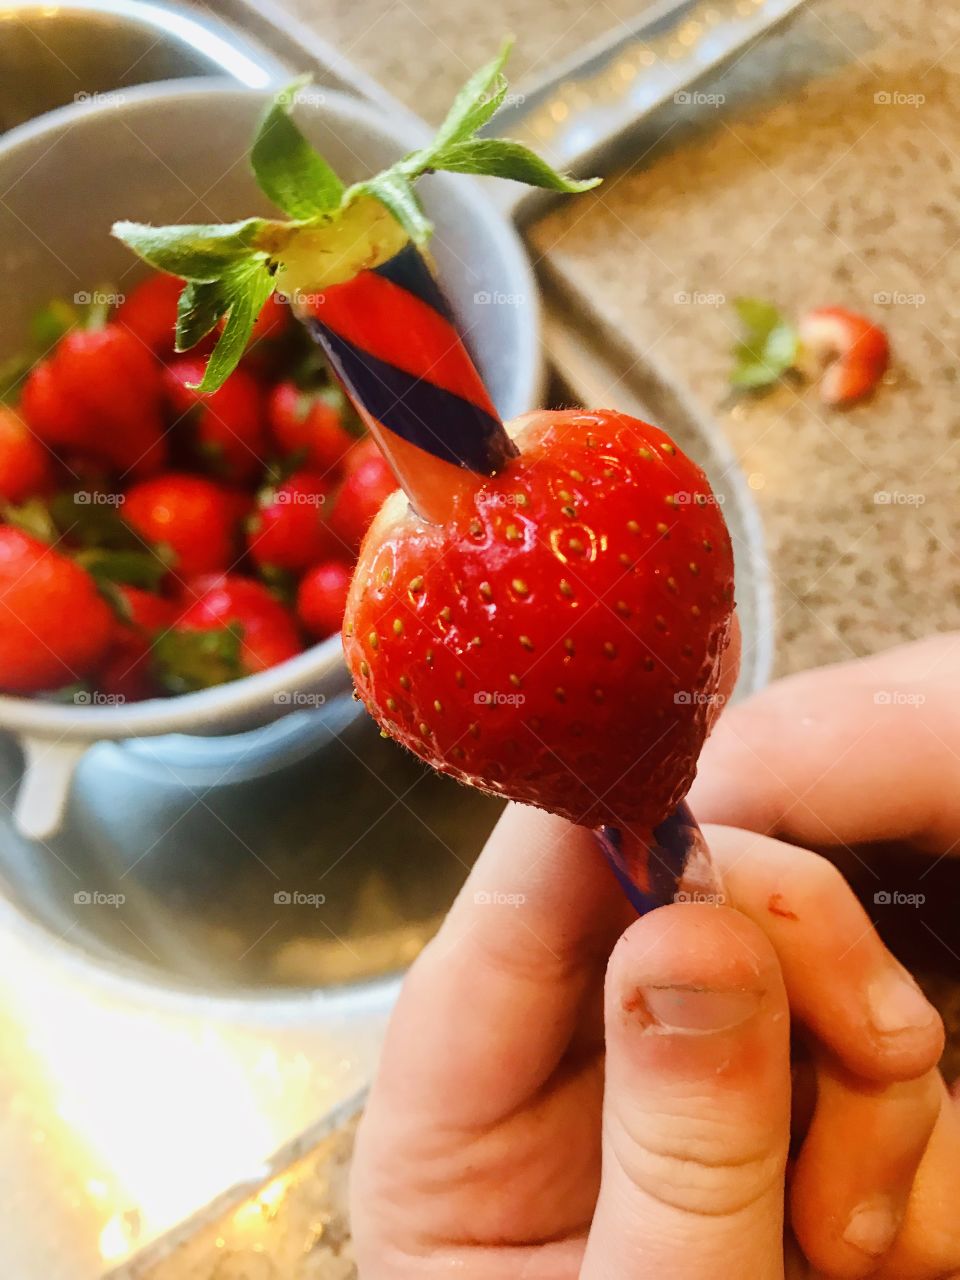 This is how we like to eat strawberries! Use a plastic straw to remove the core of the strawberry! 